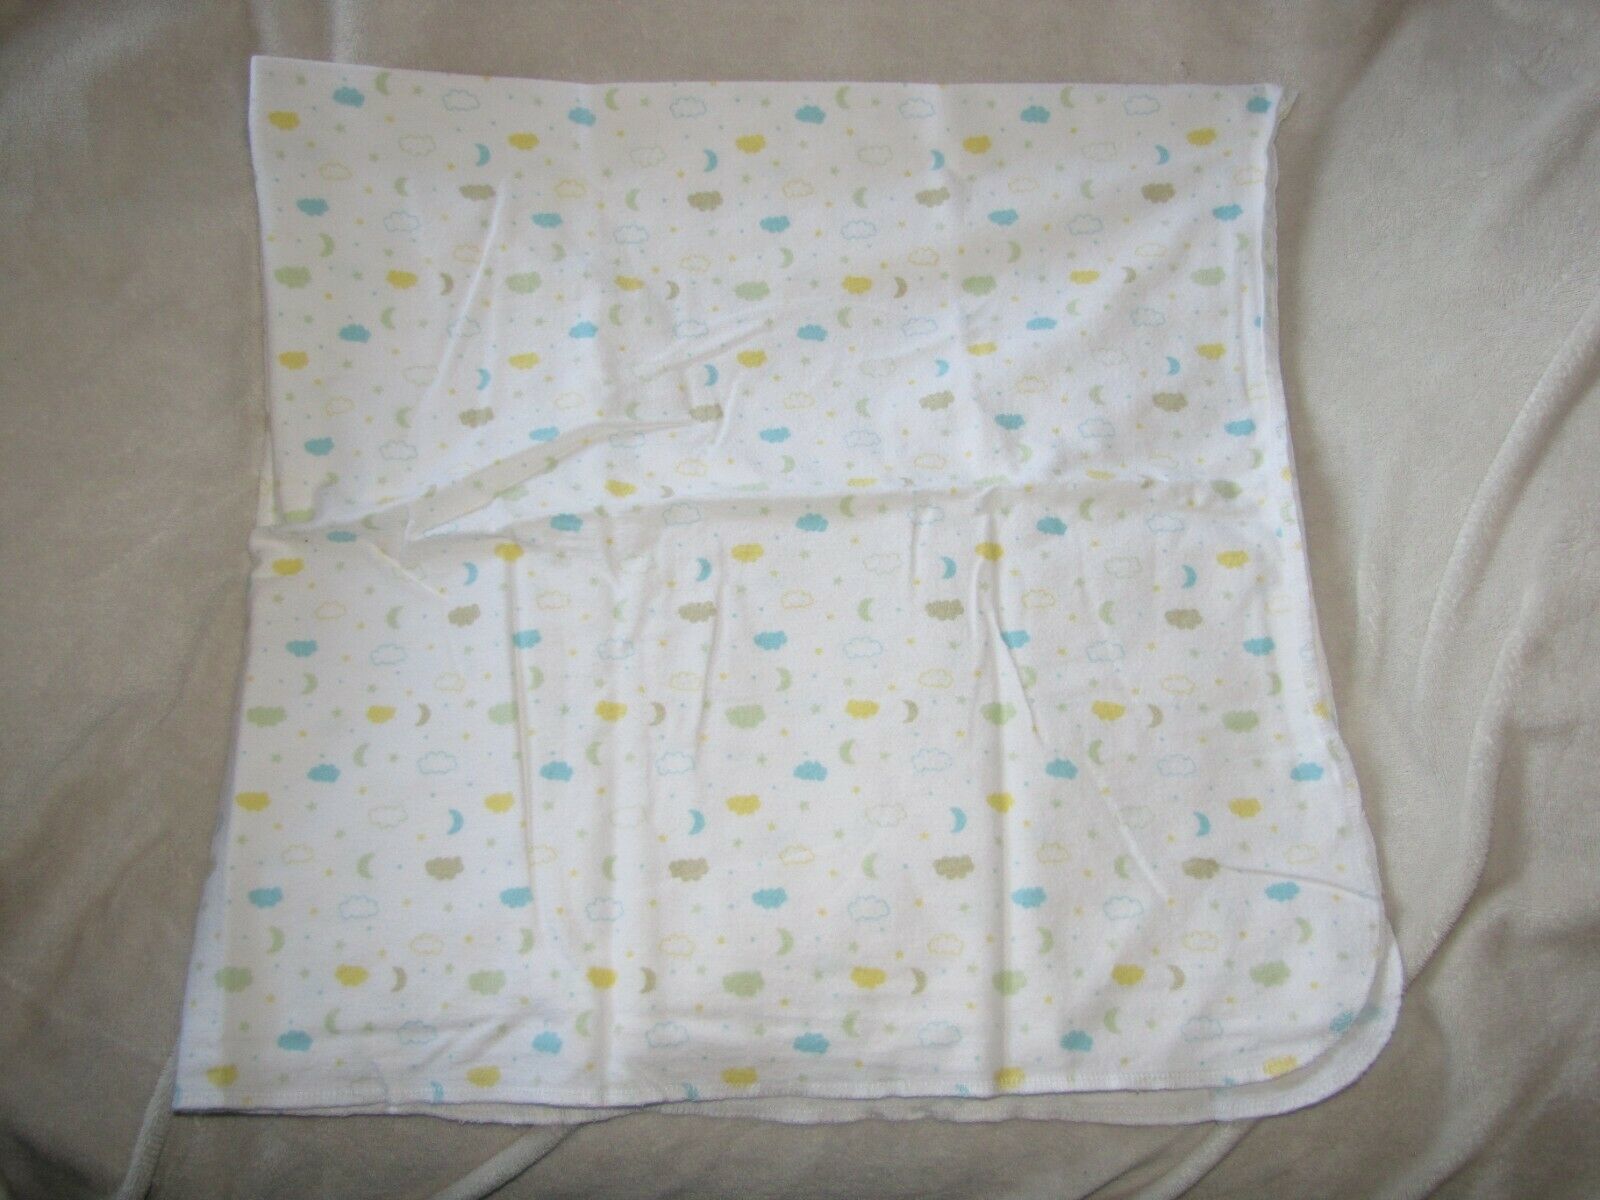 Circo White cotton flannel baby swaddle blanket Blue Yellow Green Cloud Moon - $29.69